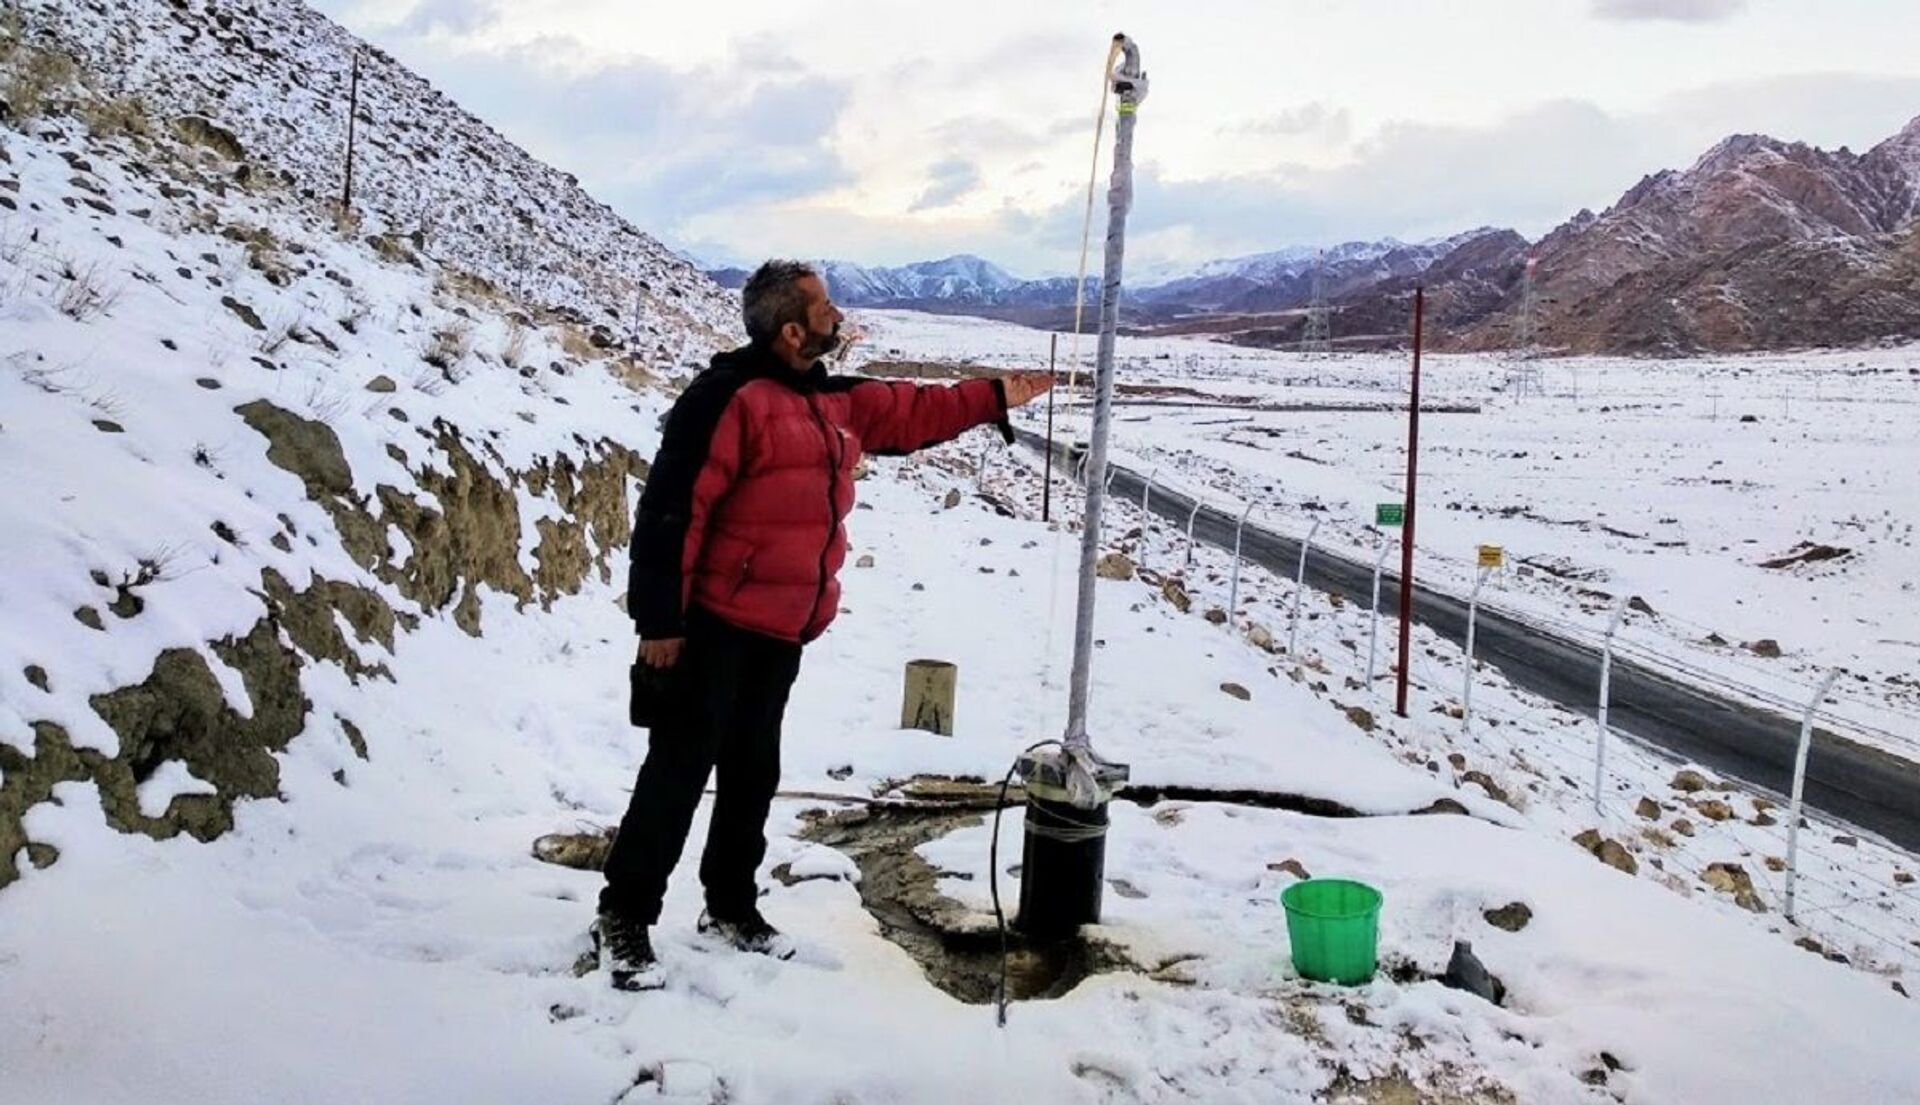 India Looking for Groundwater in Ladakh to Sustain Troops Guarding China Border, Hydrogeologist Says - Sputnik International, 1920, 23.06.2021